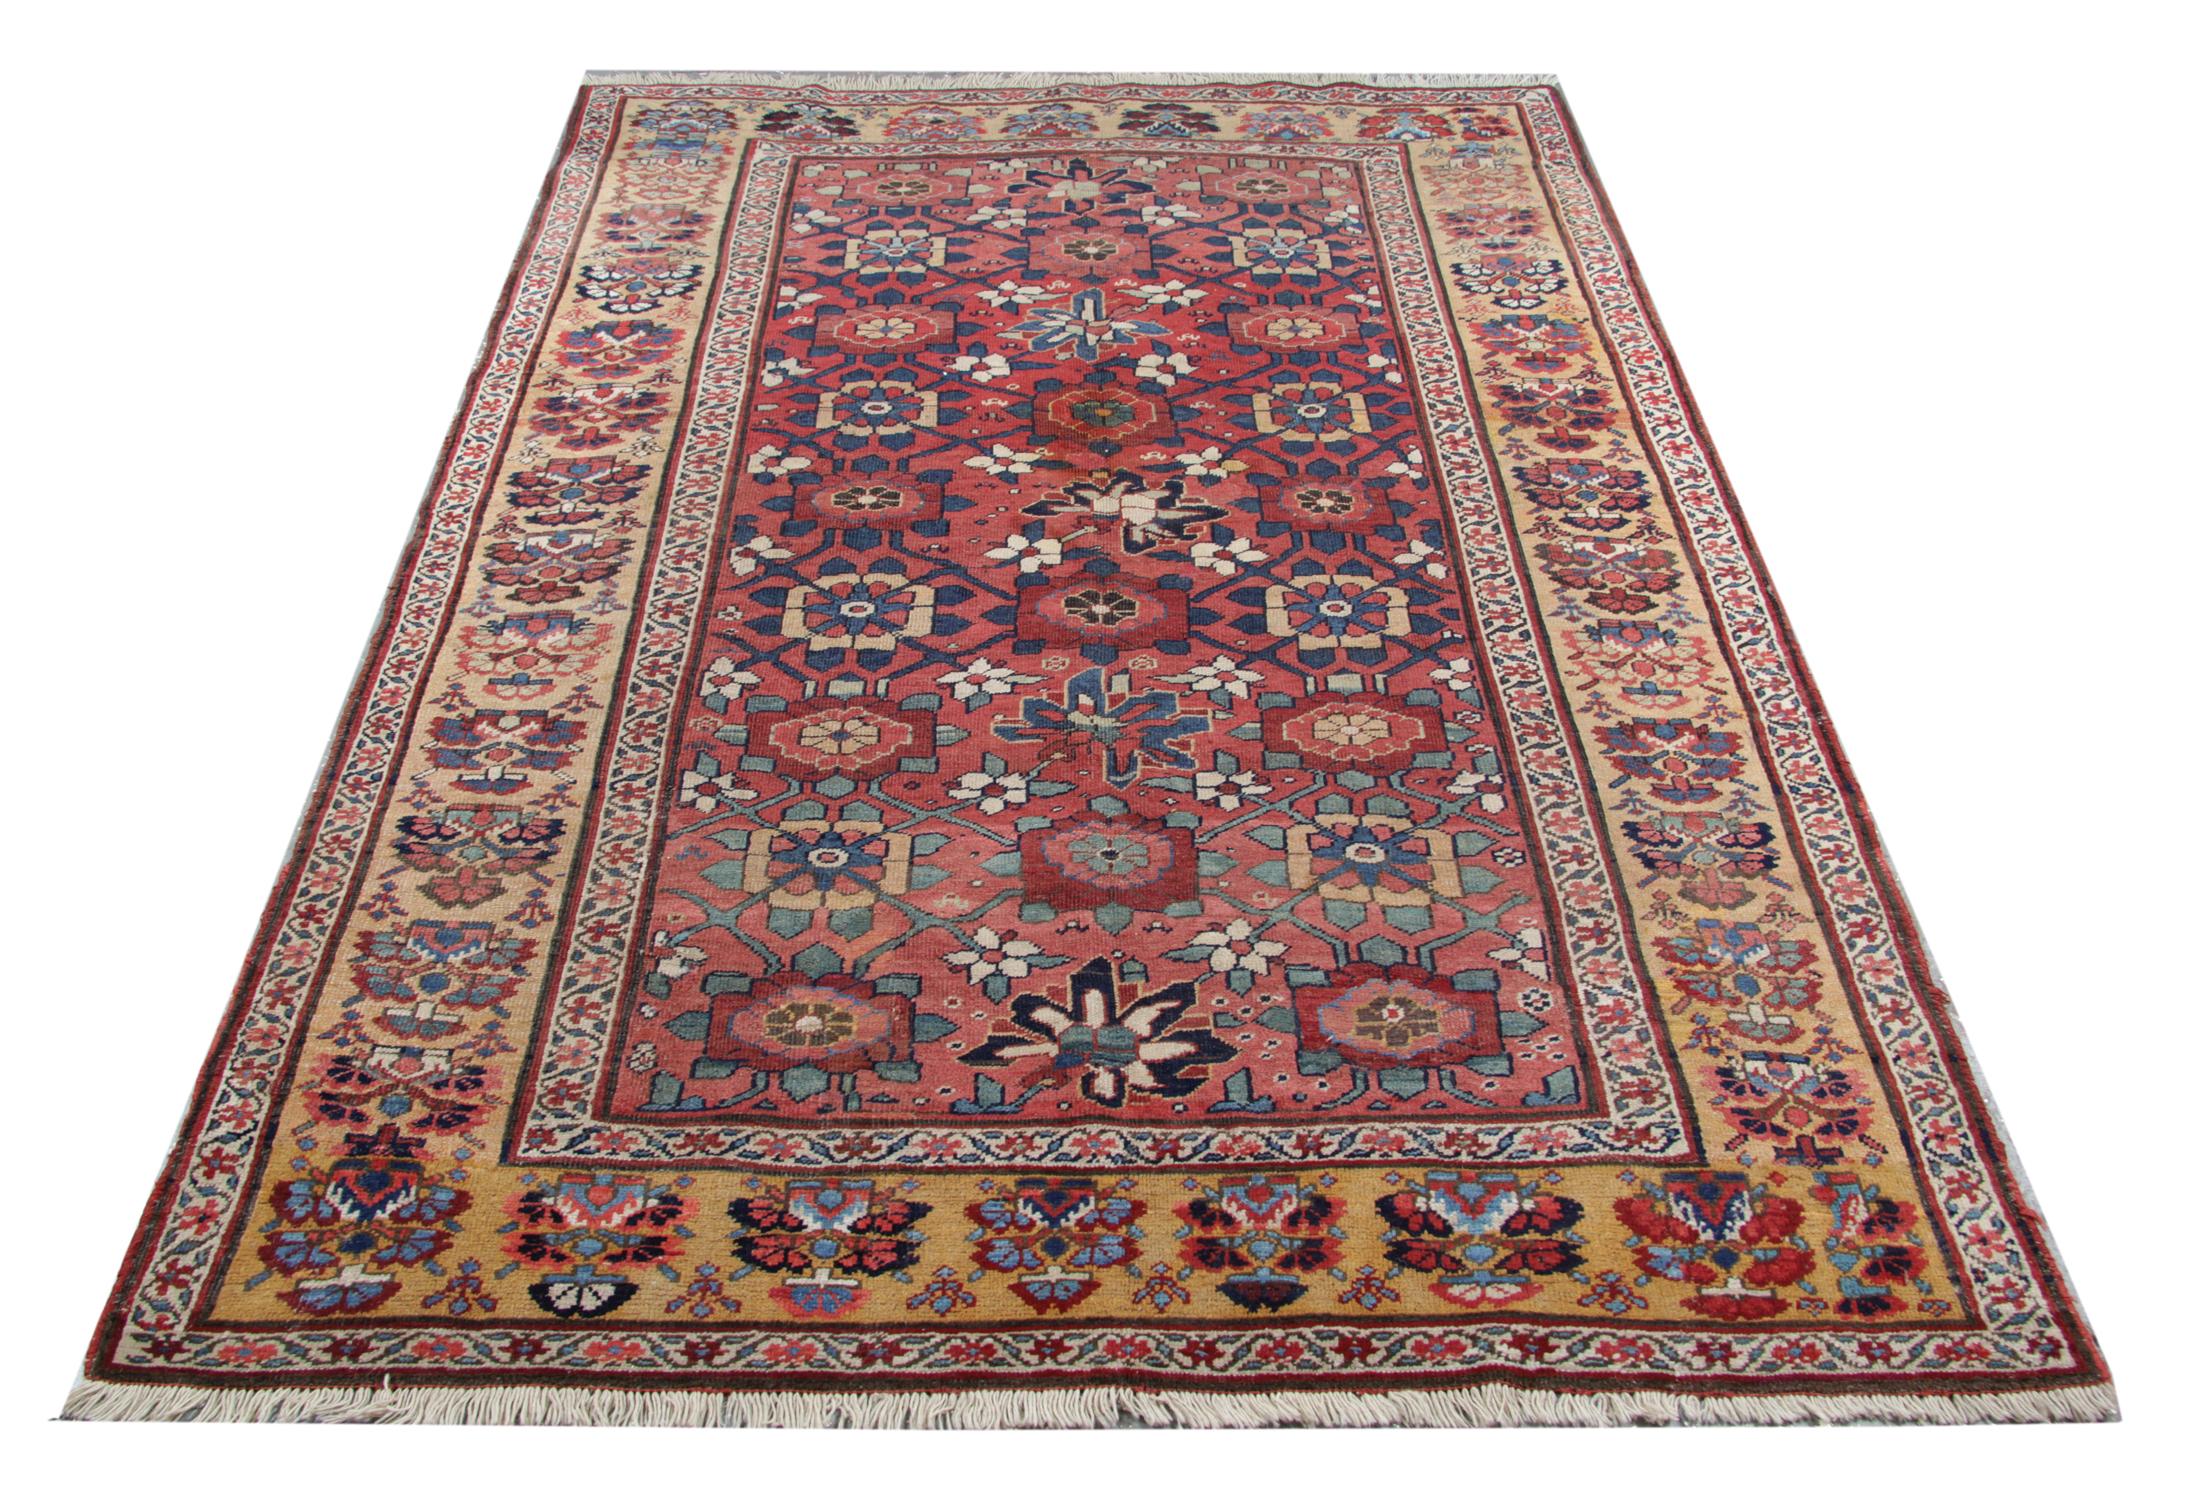 Mahal and Sultanabad have various people who migrated from different areas in the previous 19th century, which has led to the birth of multiple designs. One of the most well-known examples is the Zeigler design. This rug features a repeat floral